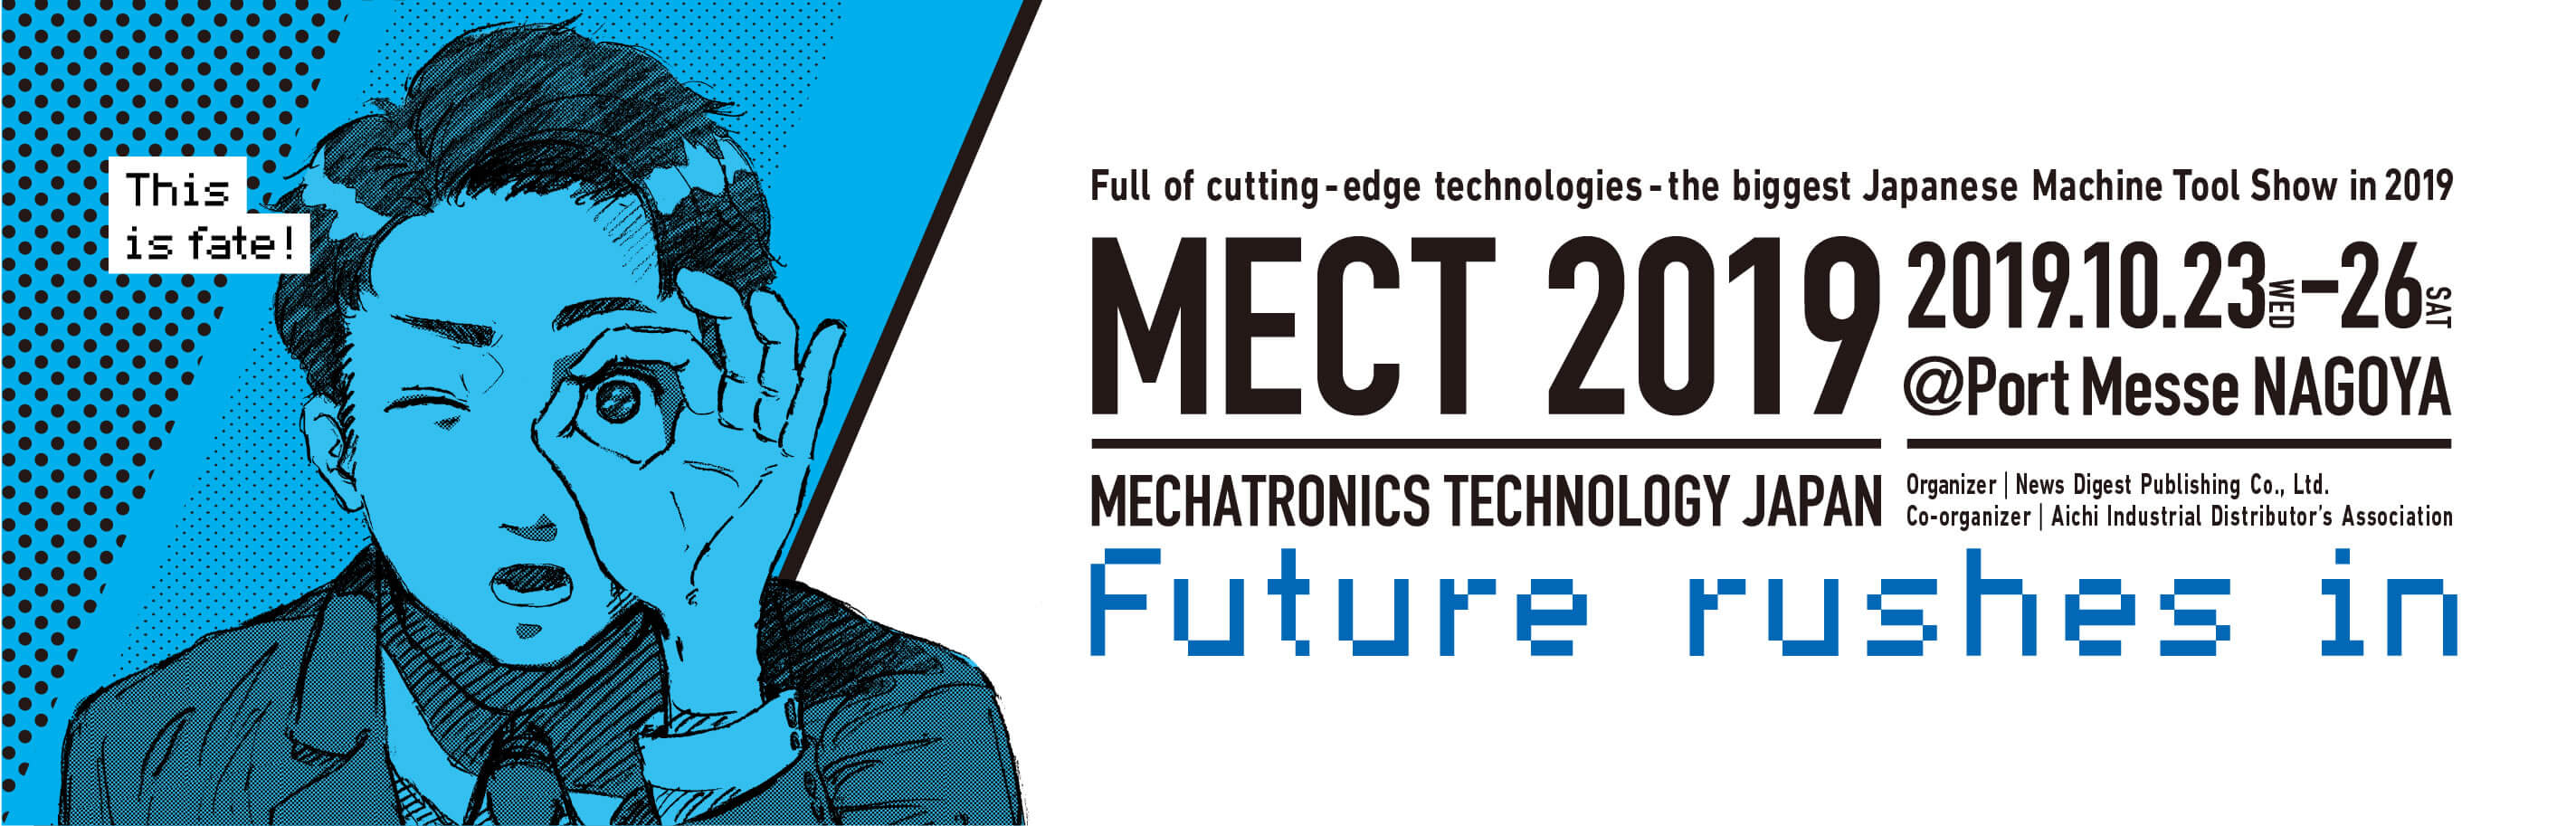 Full of cutting -edge technologies - the biggest machine tool show in JAPAN MECT2019 Future rushes in